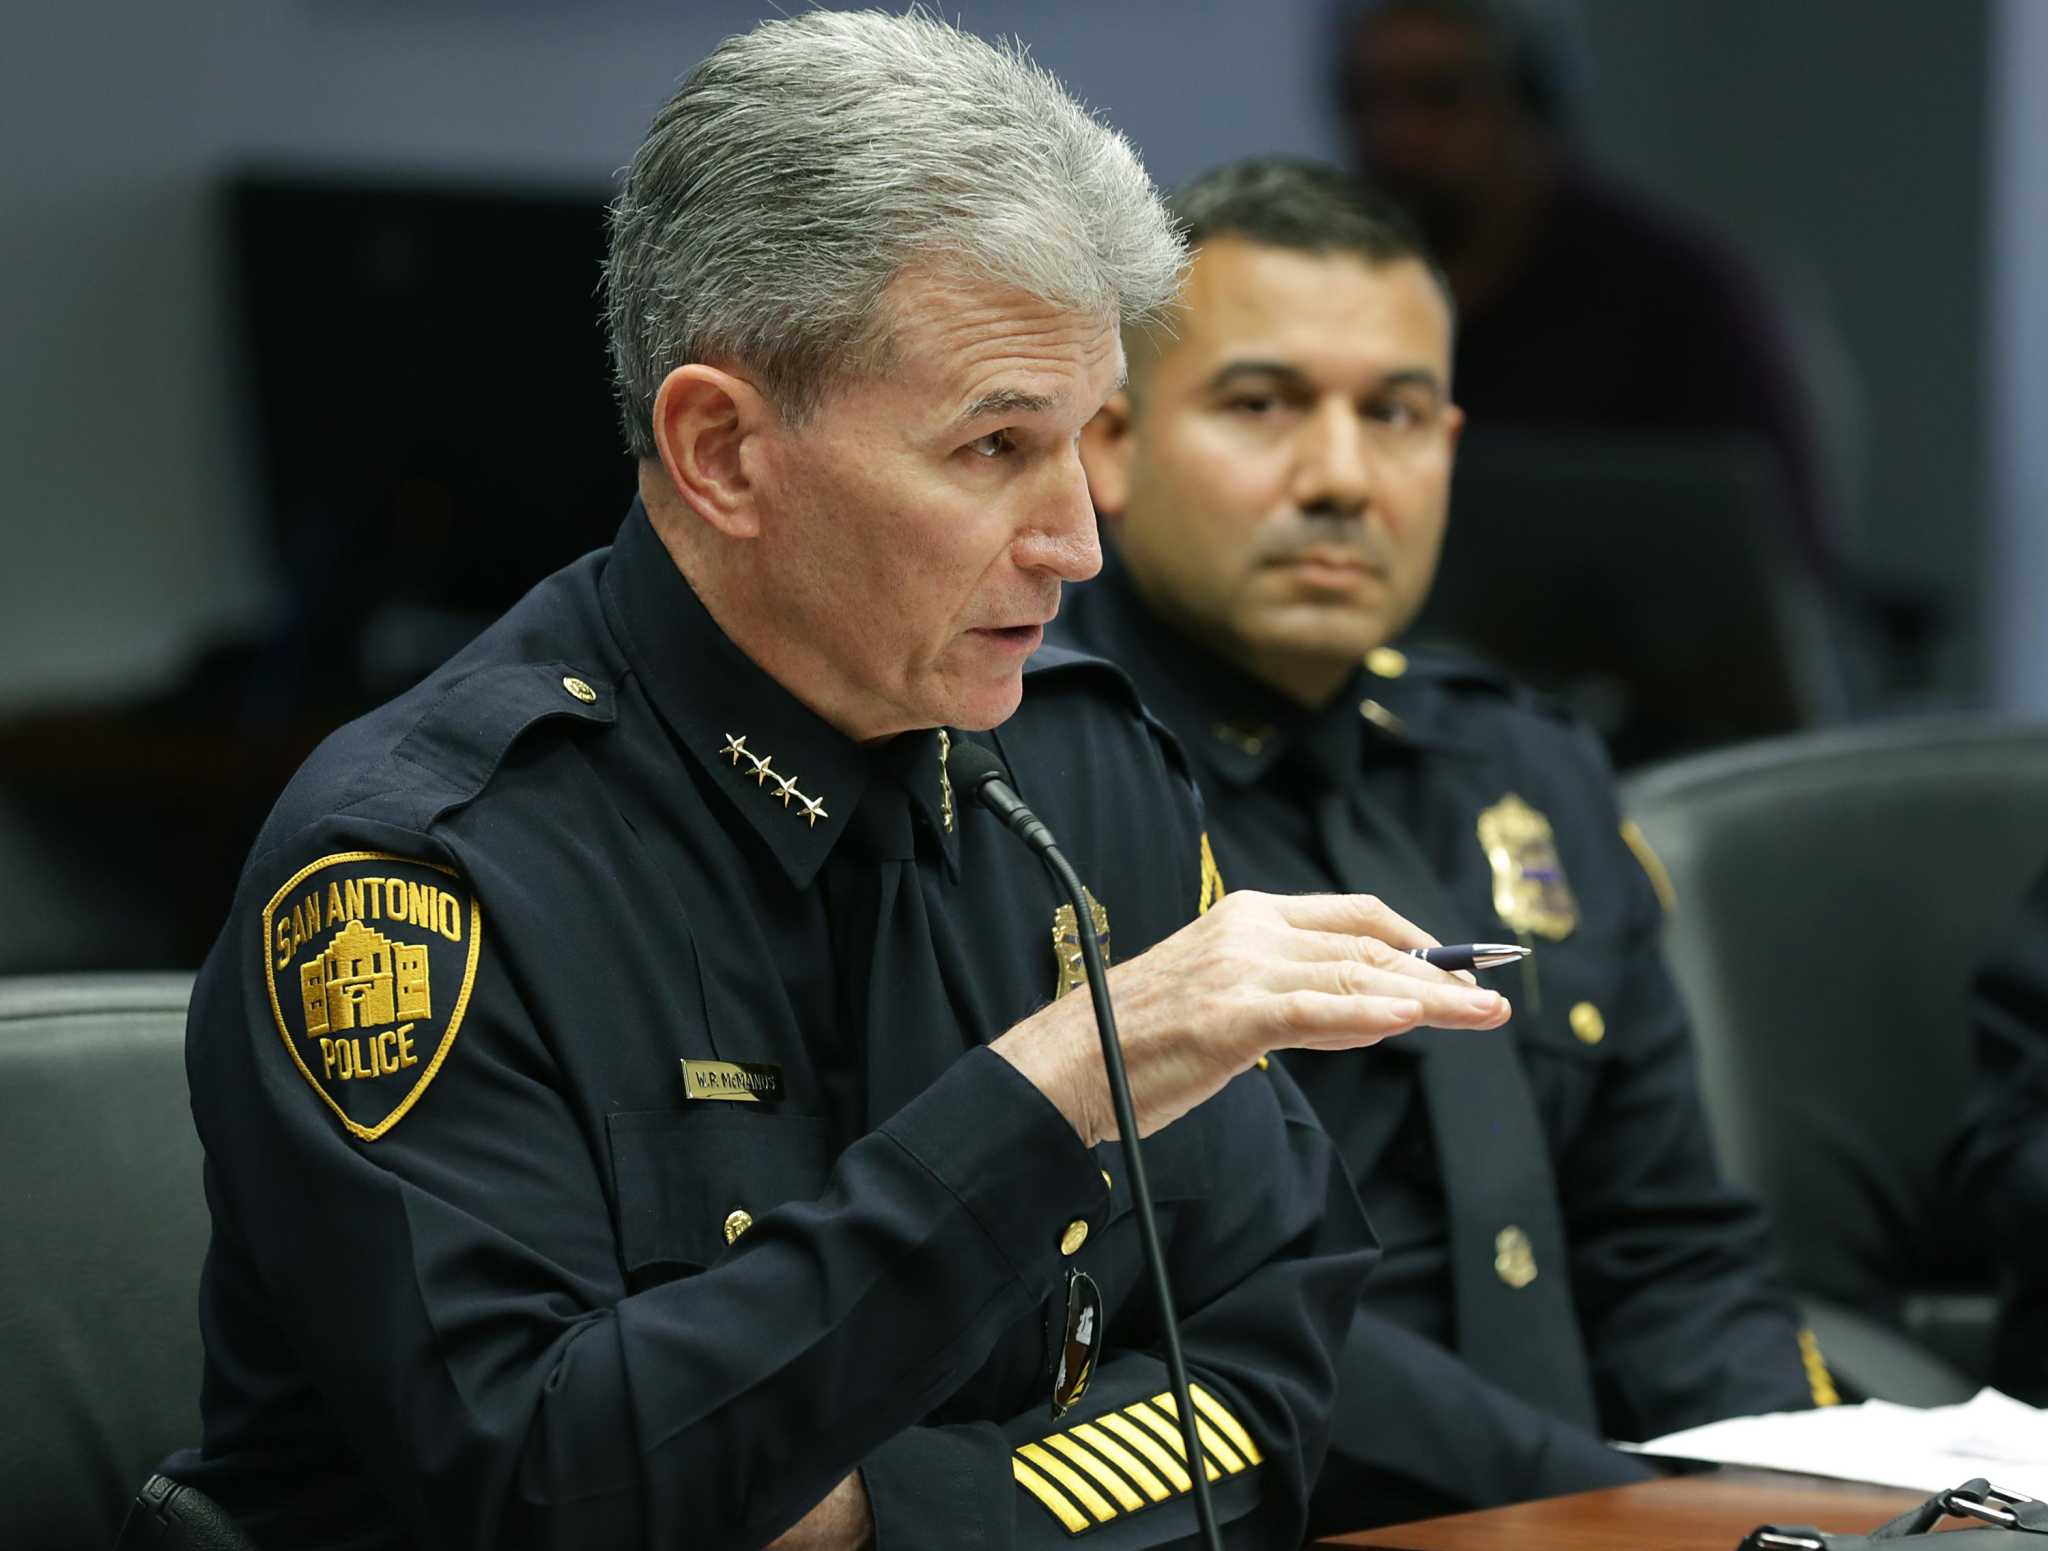 San Antonio police chief fires two officers for excessive use of force